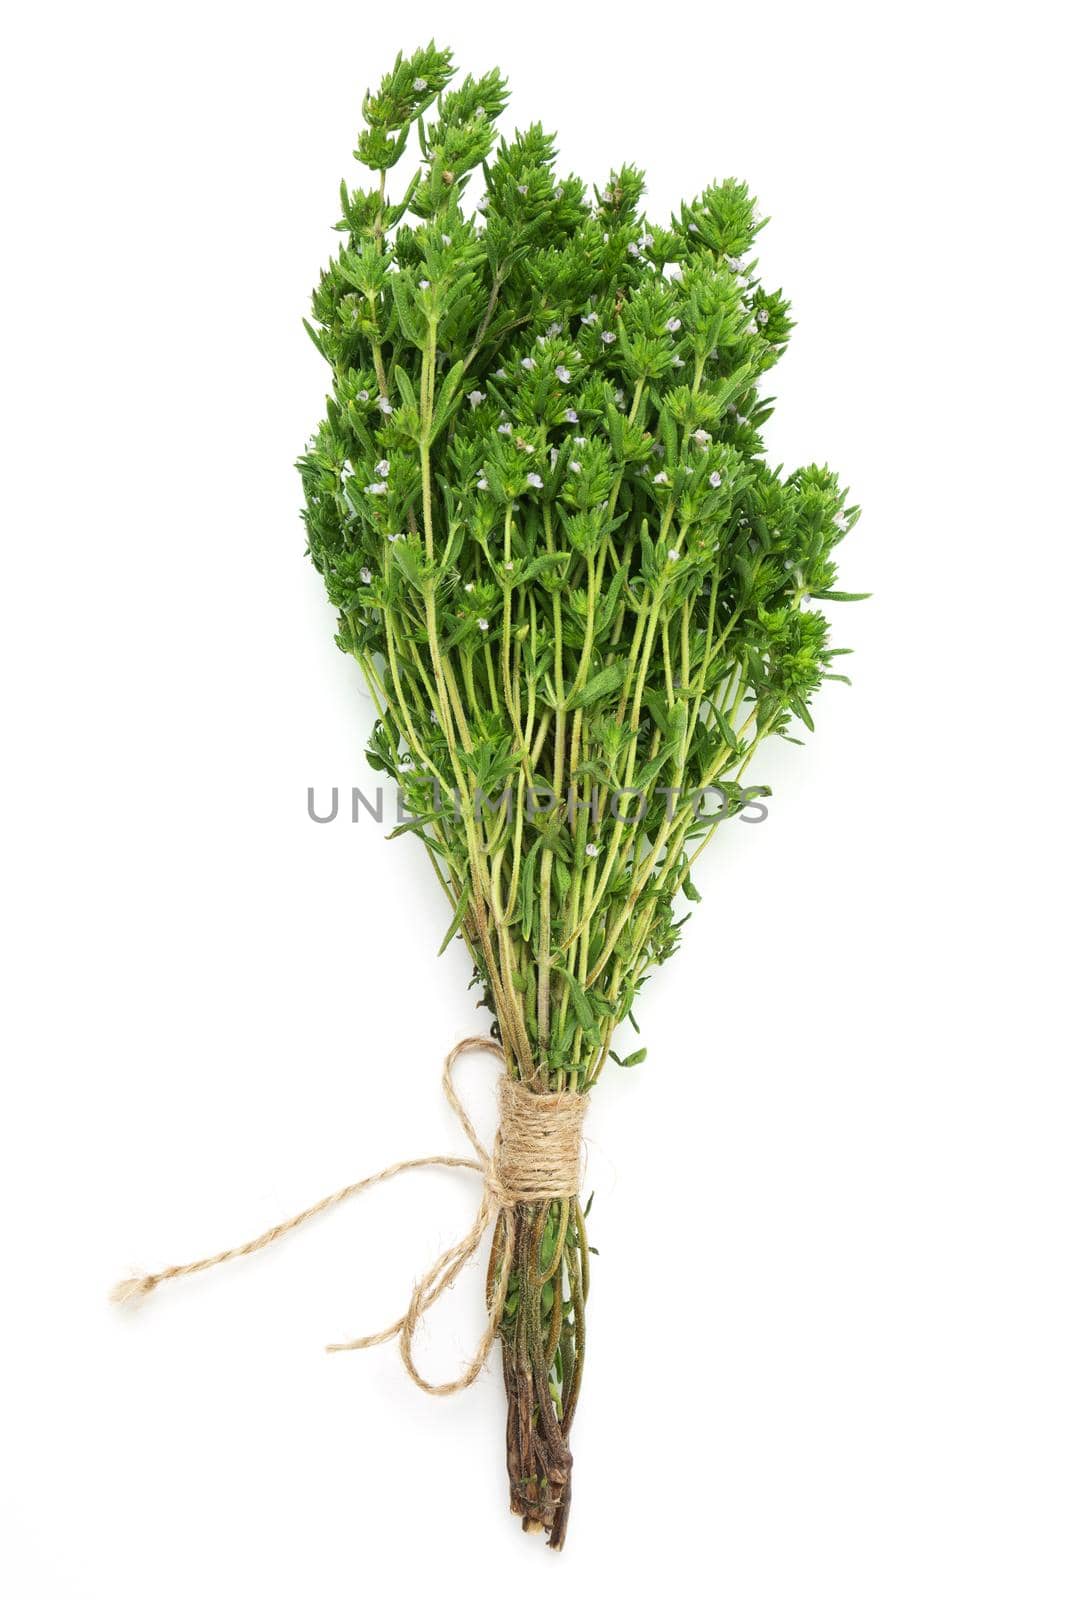 bunch of thyme twigs isolated on white background.